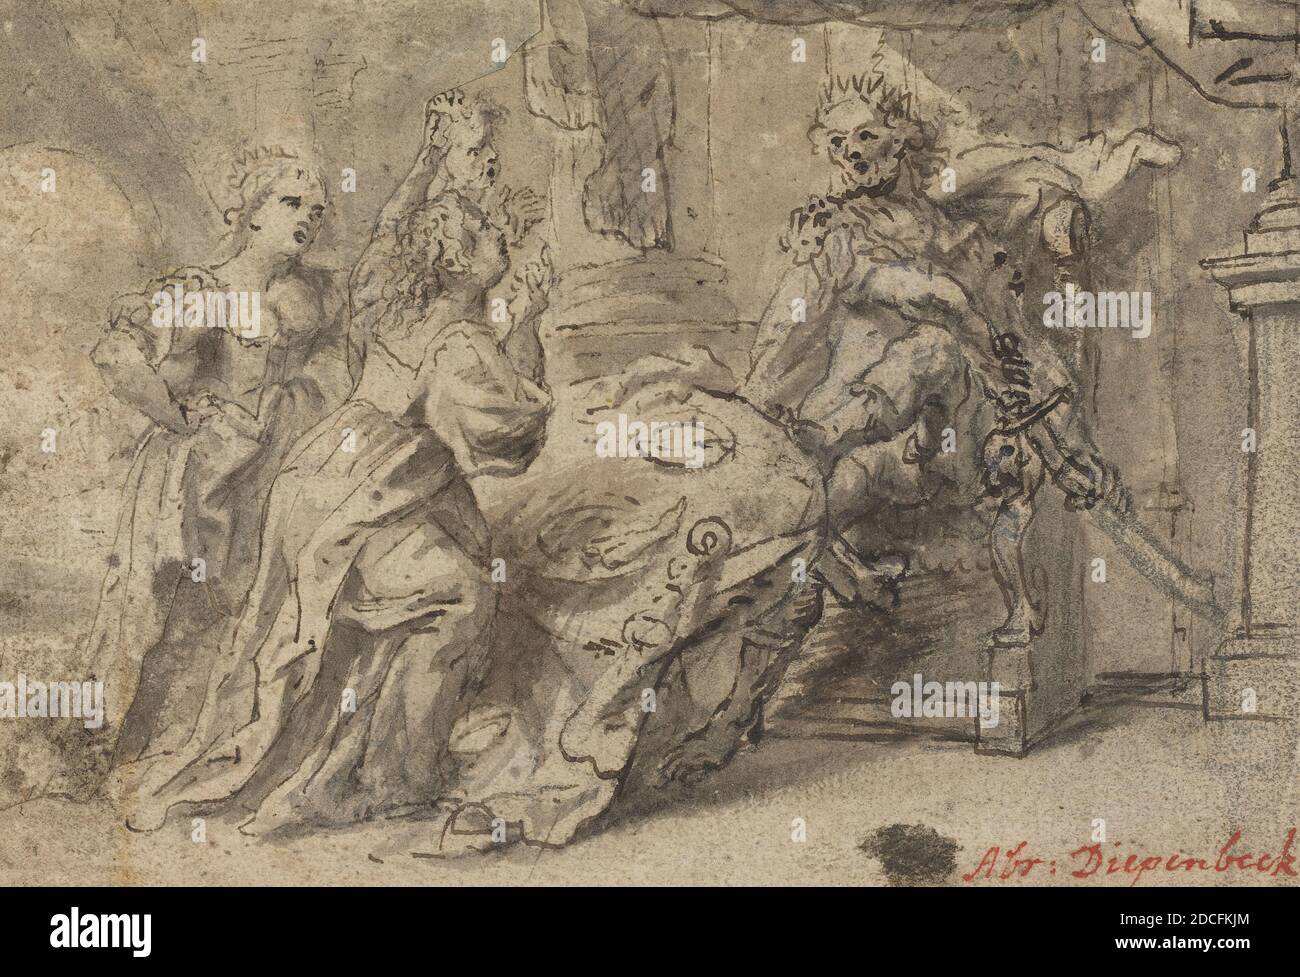 Anonymous Artist, (artist), Abraham van Diepenbeeck, (related artist), Flemish, 1596 - 1675, Philomela, Procne, and the Thracian King Tereus, pen and brown ink with gray wash on laid paper, overall (approximate): 10.5 x 15.4 cm (4 1/8 x 6 1/16 in Stock Photo